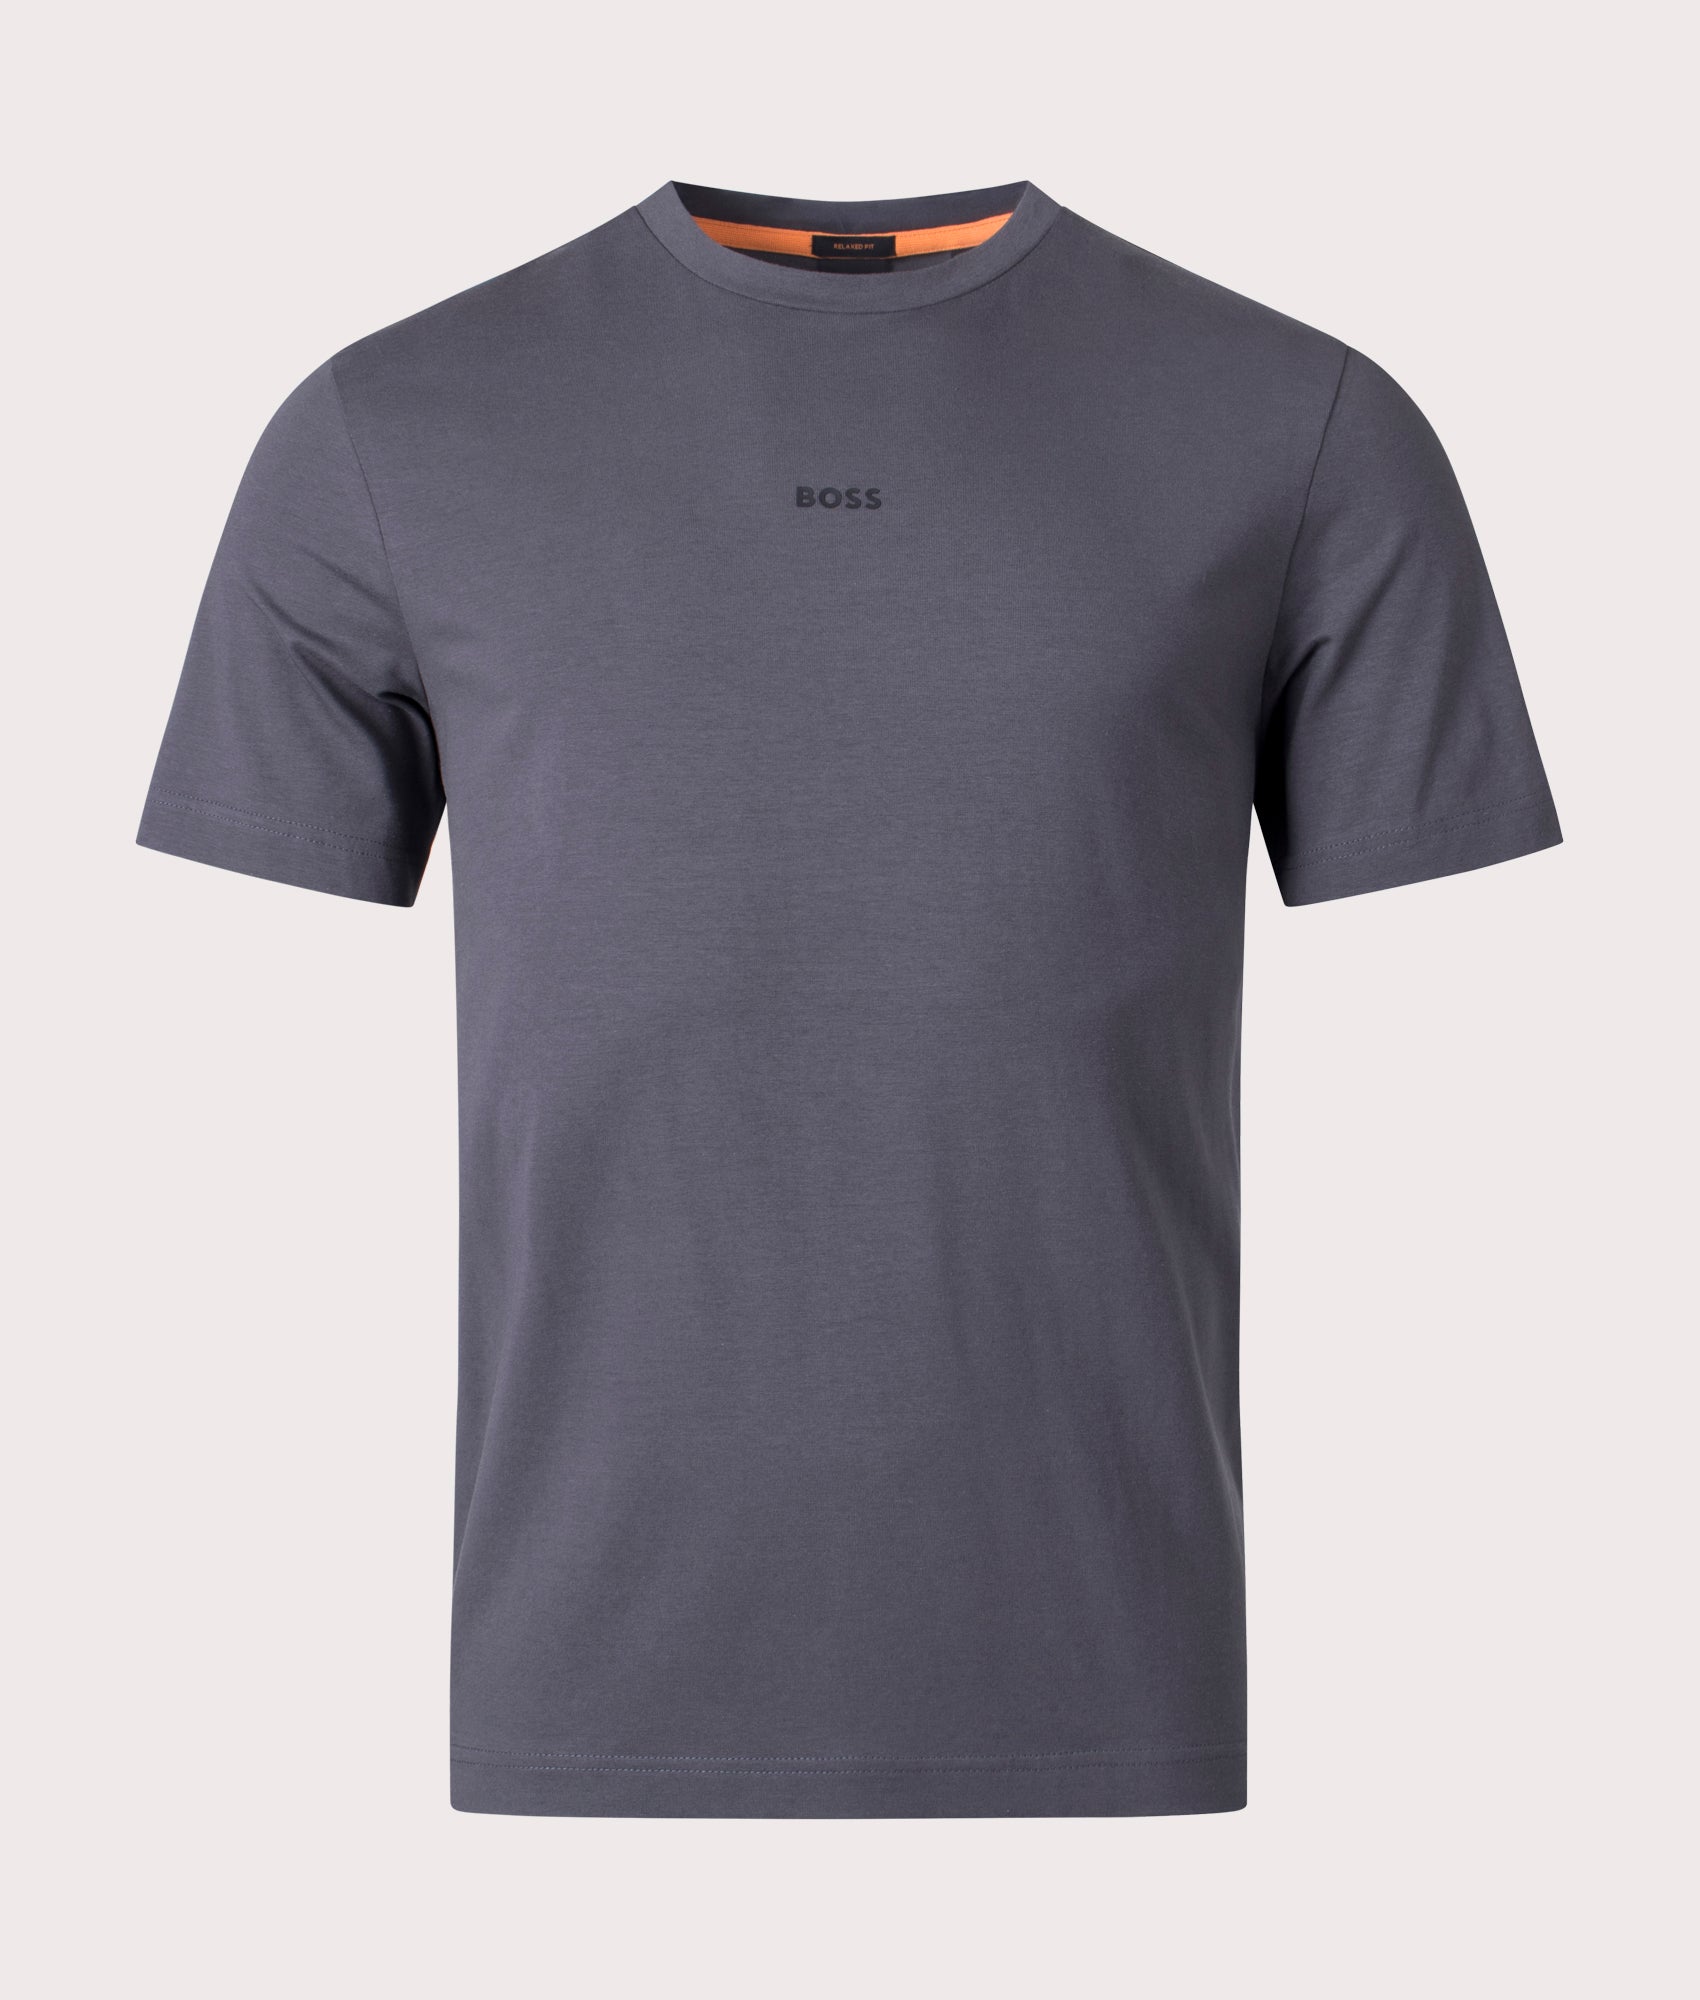 BOSS Mens Relaxed Fit TChup T-Shirt - Colour: 022 Dark Grey - Size: Large